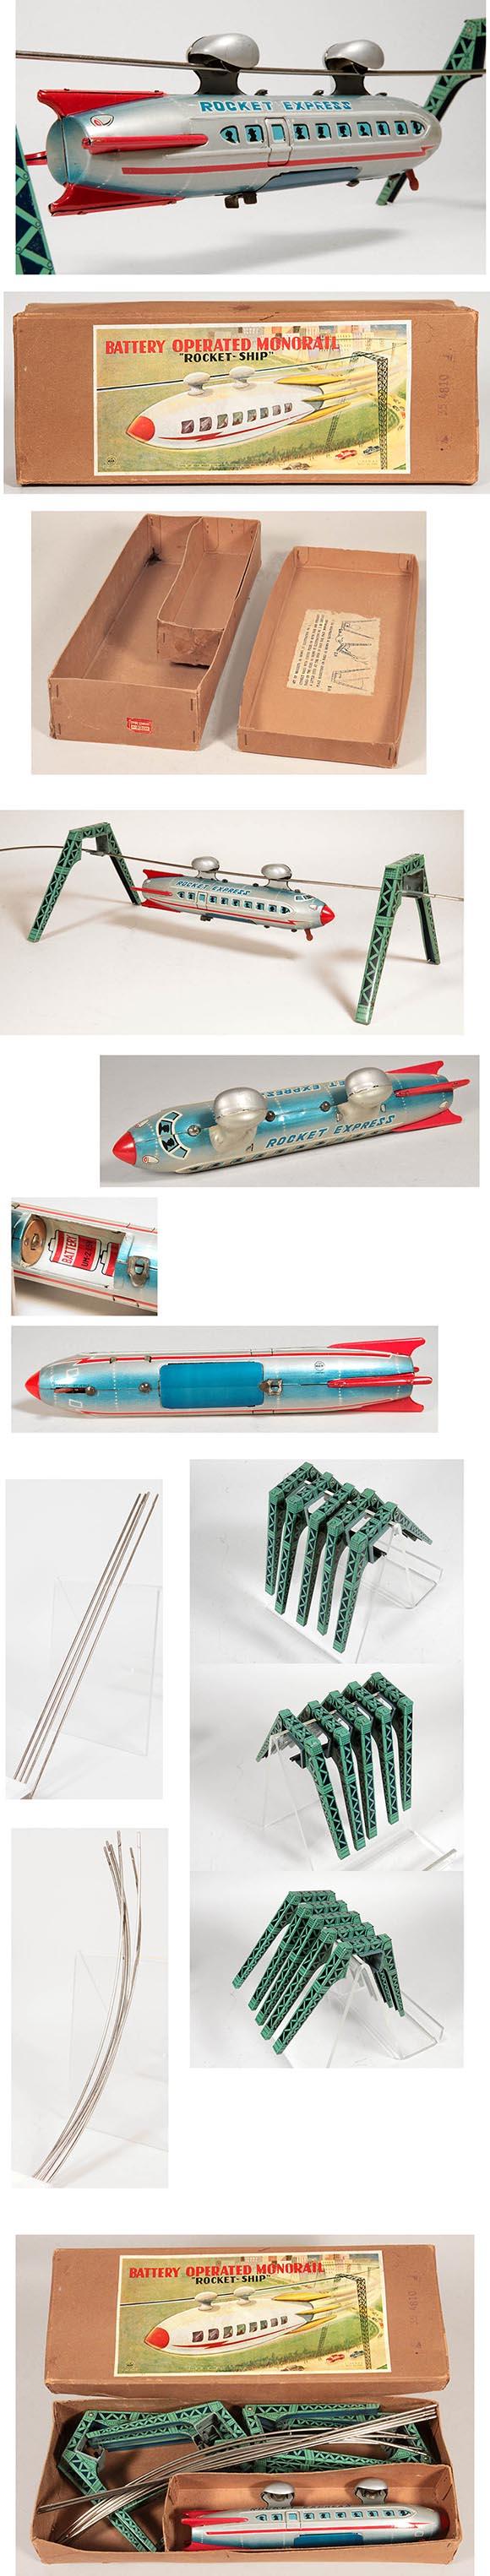 1956 Linemar, Battery Operated Monorail Rocket-Ship in Original Box